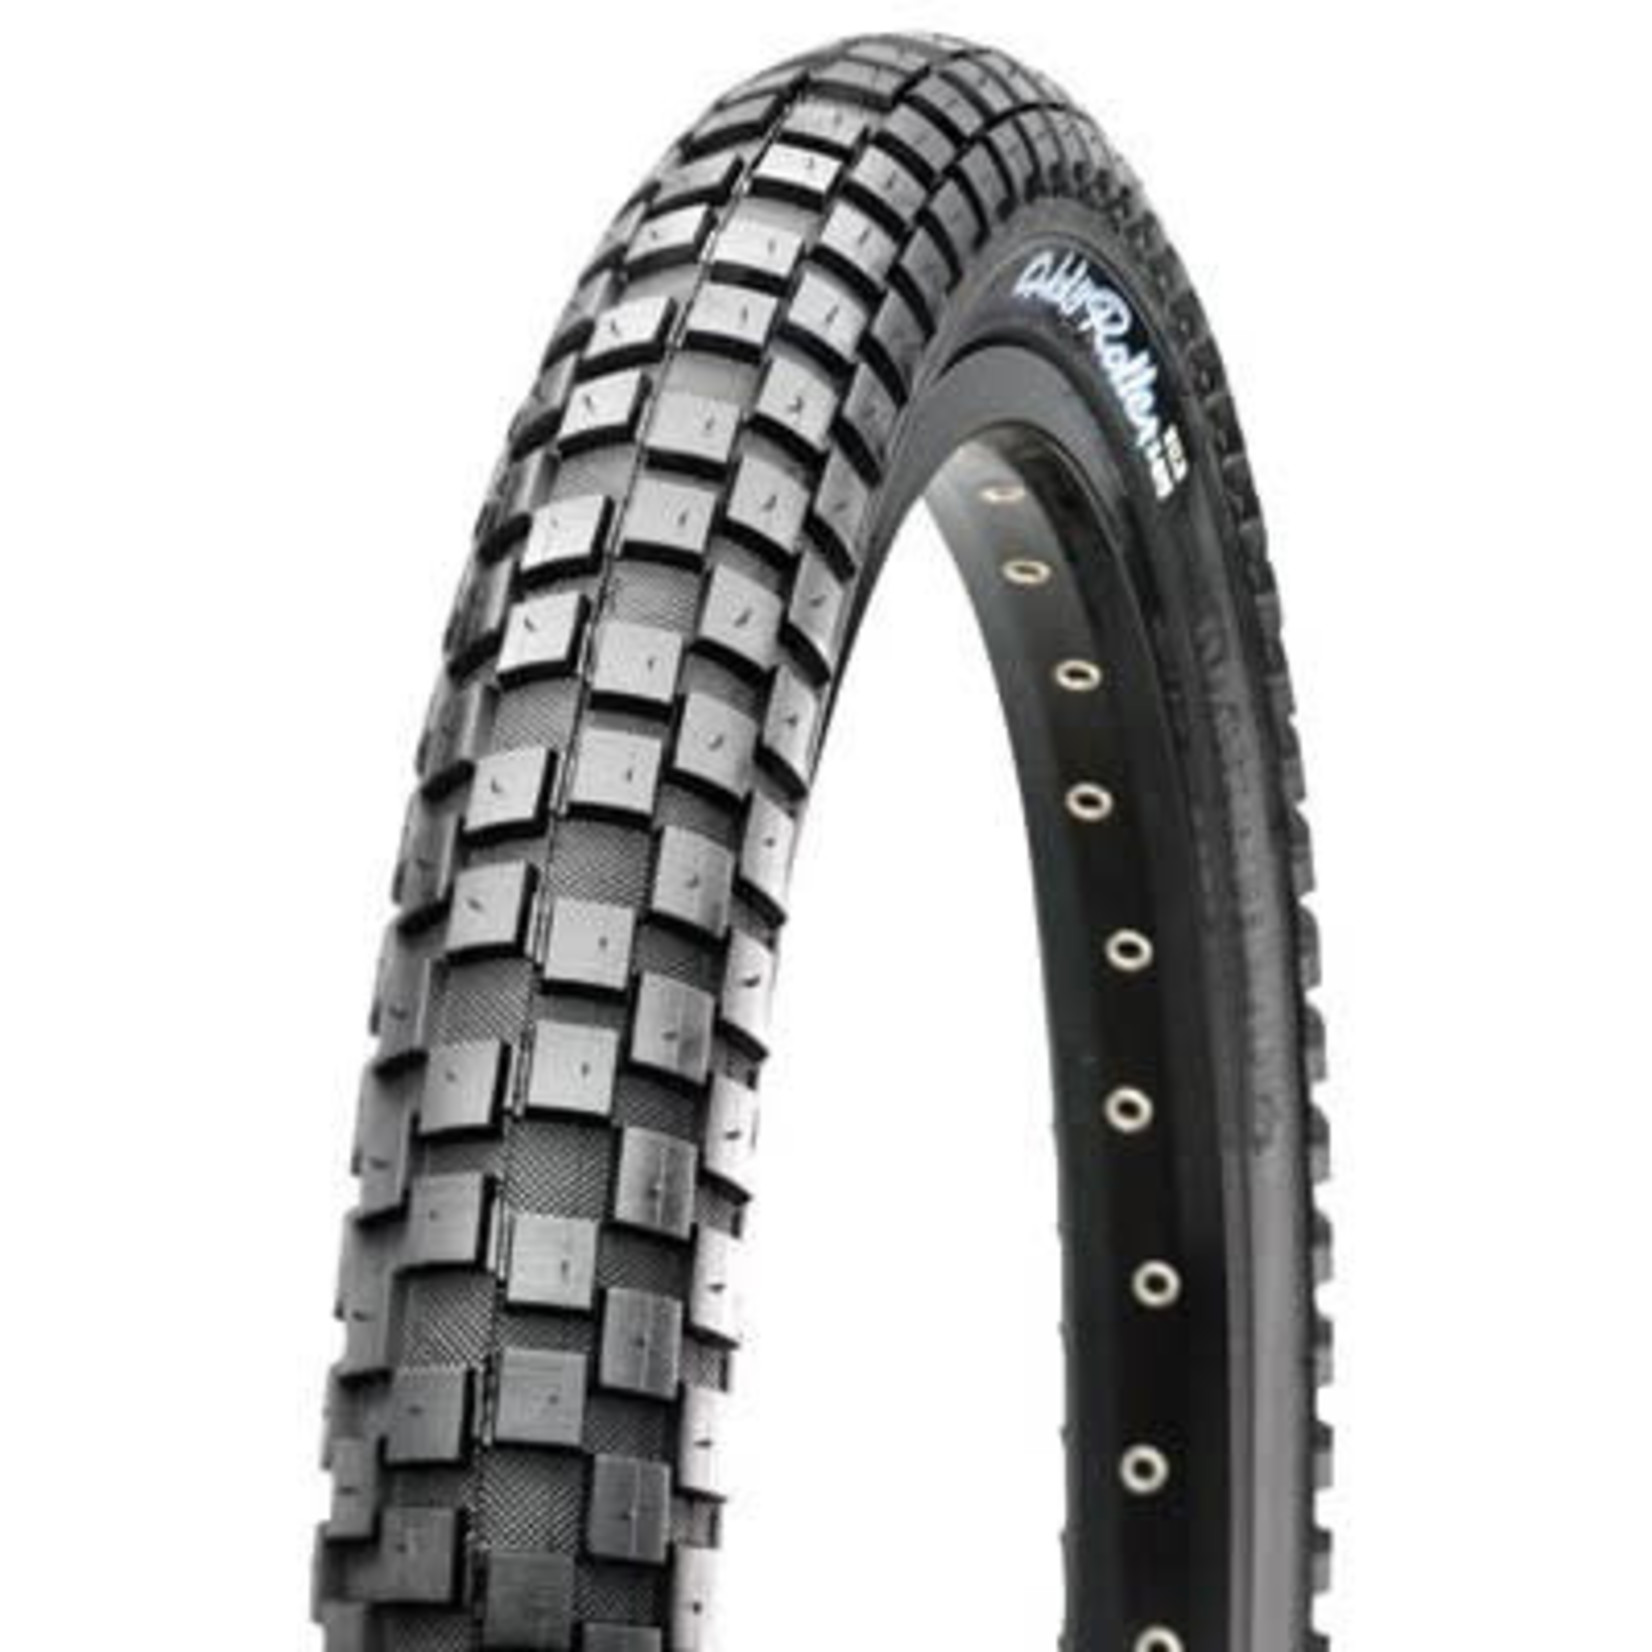 Maxxis MAXXIS,HOLY ROLLER,26X2.4 60a,WIRE,URBAN